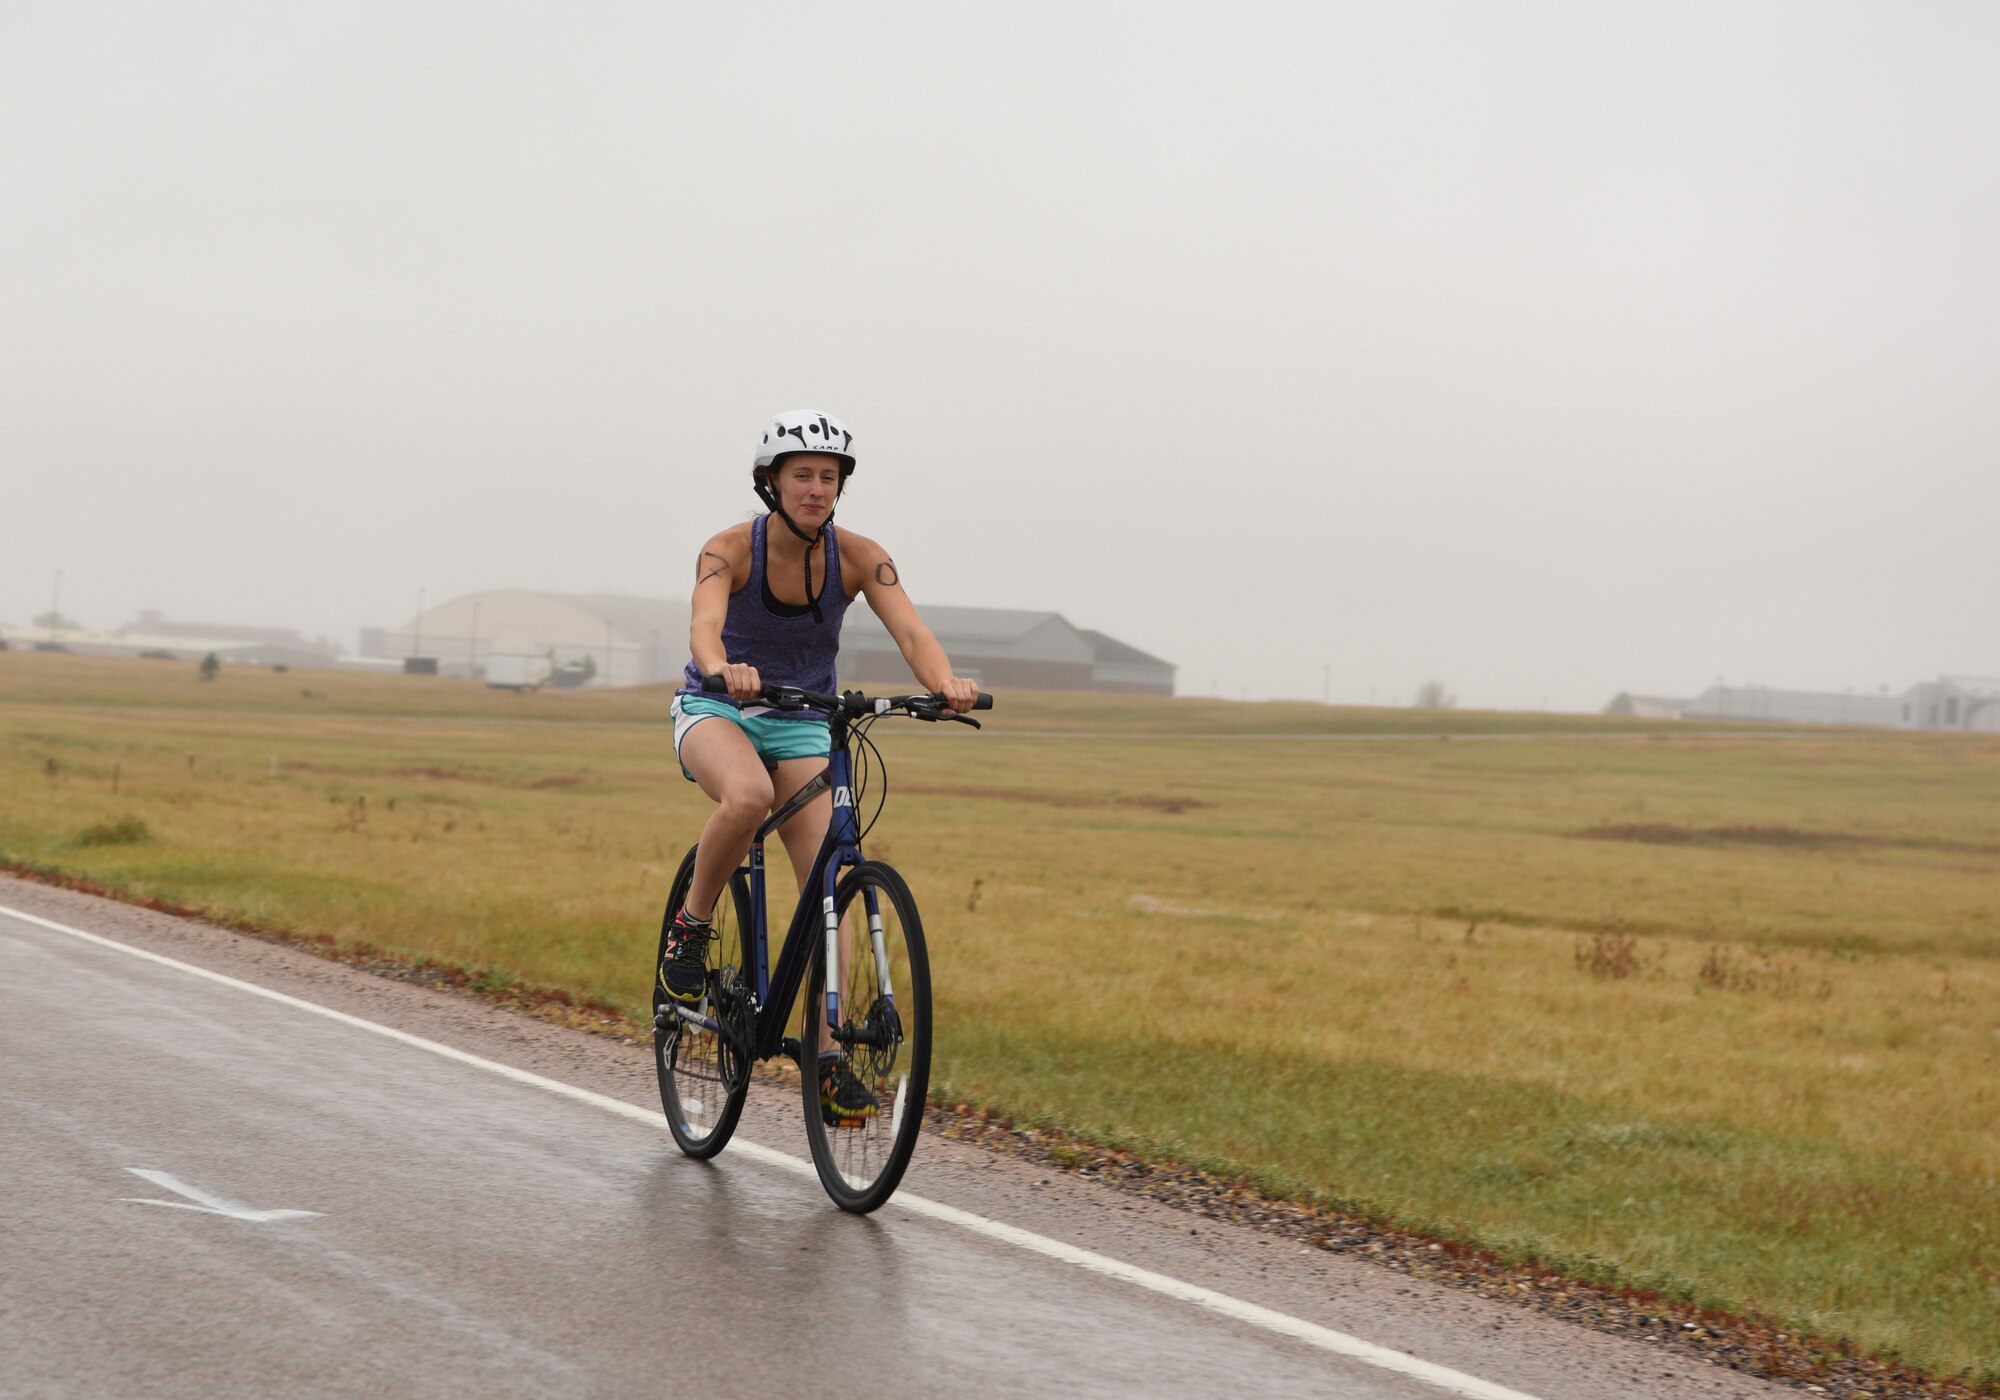 Corrie McFarland, a dependent, rides her bicycle during a triathlon at Ellsworth Air Force Base, S.D., Sept. 15, 2018. The 28th Force Support Squadron hosted the tri-to-b1 triathlon, which consisted of a 500-meter swim, a five-kilometer run and a 10-kilometer bicycle ride. (U.S. Air Force Photo by Airman 1st Class Thomas Karol)